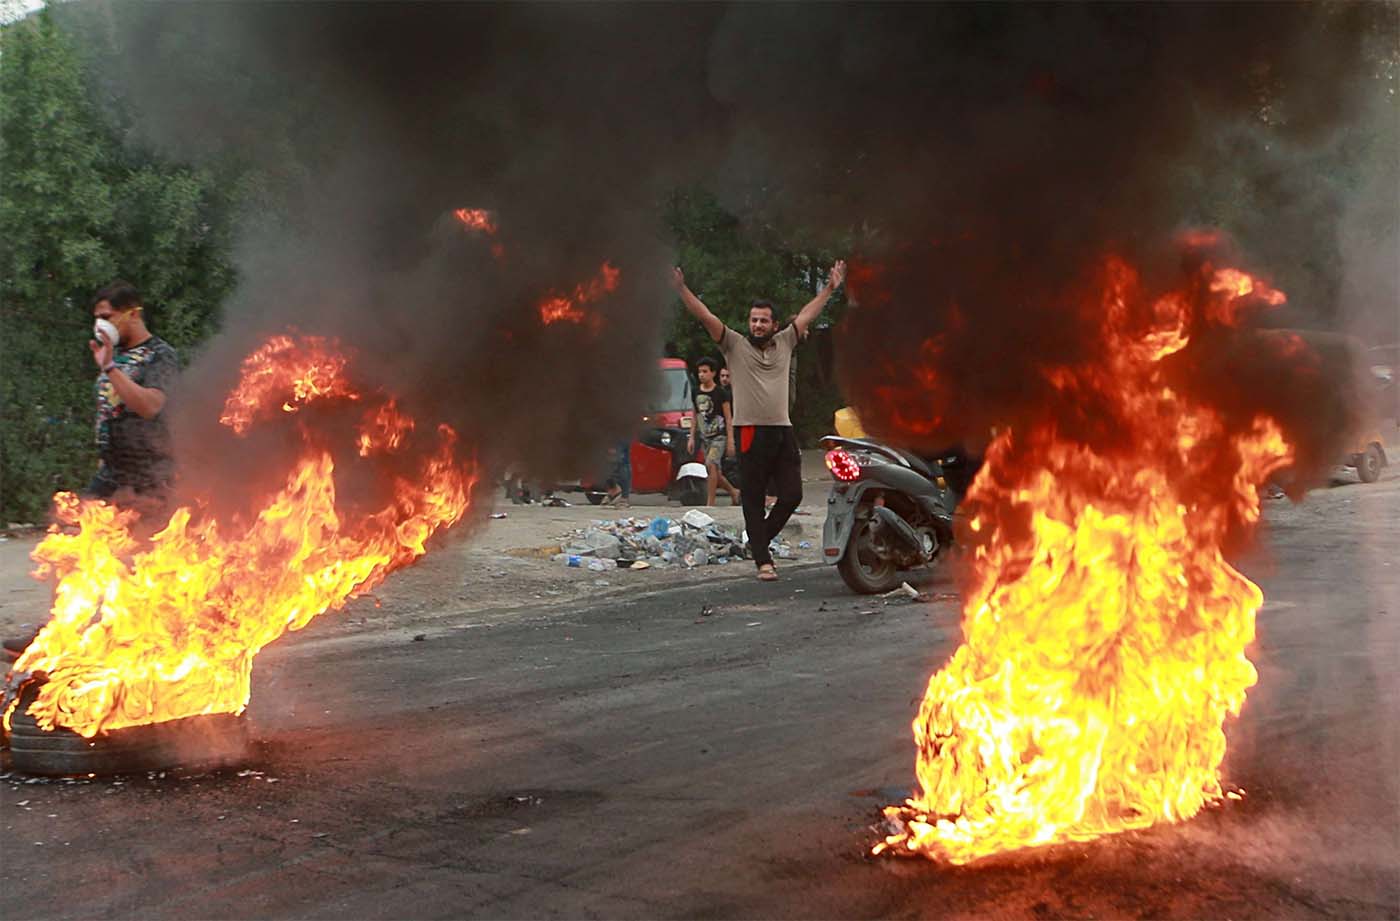 Anti-government protesters set fires and close a street during a demonstration in Baghdad